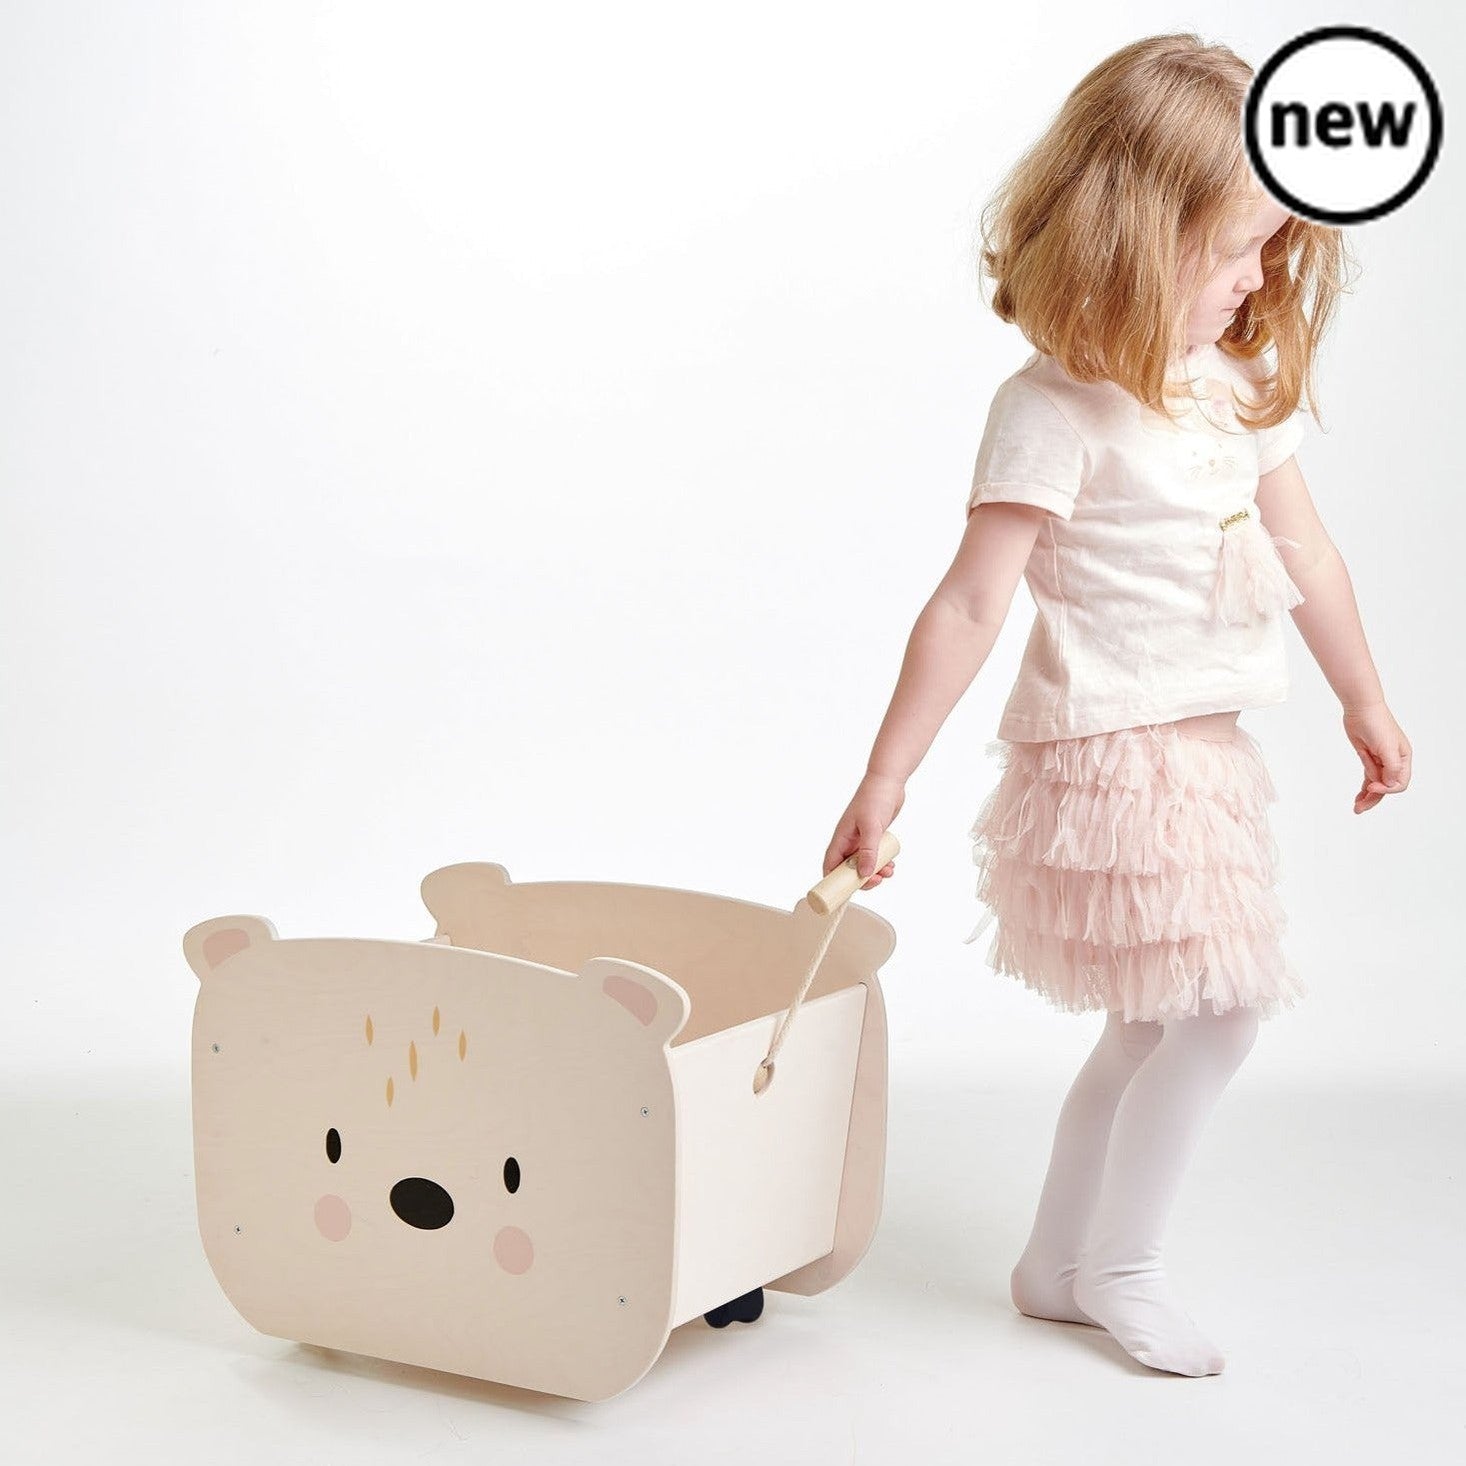 Tenderleaf Toys Pull Along Bear Cart, A wooden toy box on 4 wheels! Pull along this handsome polar bear and fill it with your favourite toys and books. Keep your room tidy with this sturdy, stylish toy or book box. Self assembly required. Suitable for children age 3+ Product dimensions: 0.36 x 0.55 x 0.07 meters, Tenderleaf Toys Pull Along Bear Cart,Wooden Toys,Tenderleaf, 